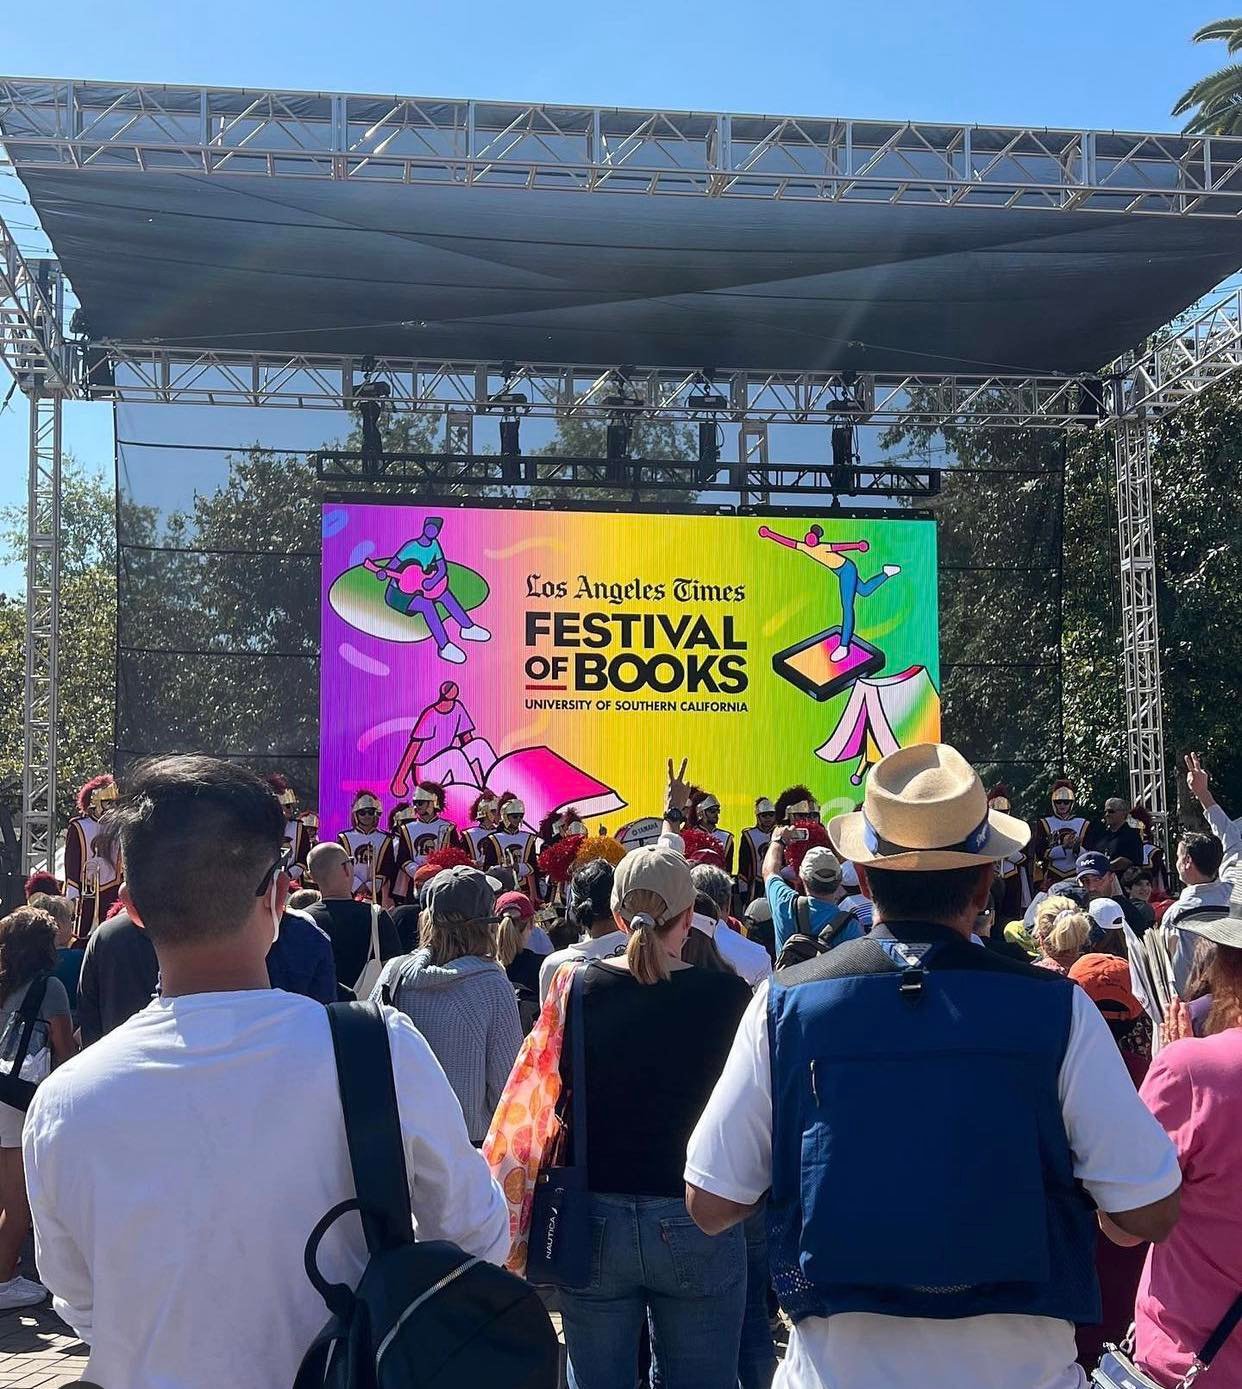 URLink Print and Media, an Exhibitor at the Los Angeles Times Festival of Books 2022